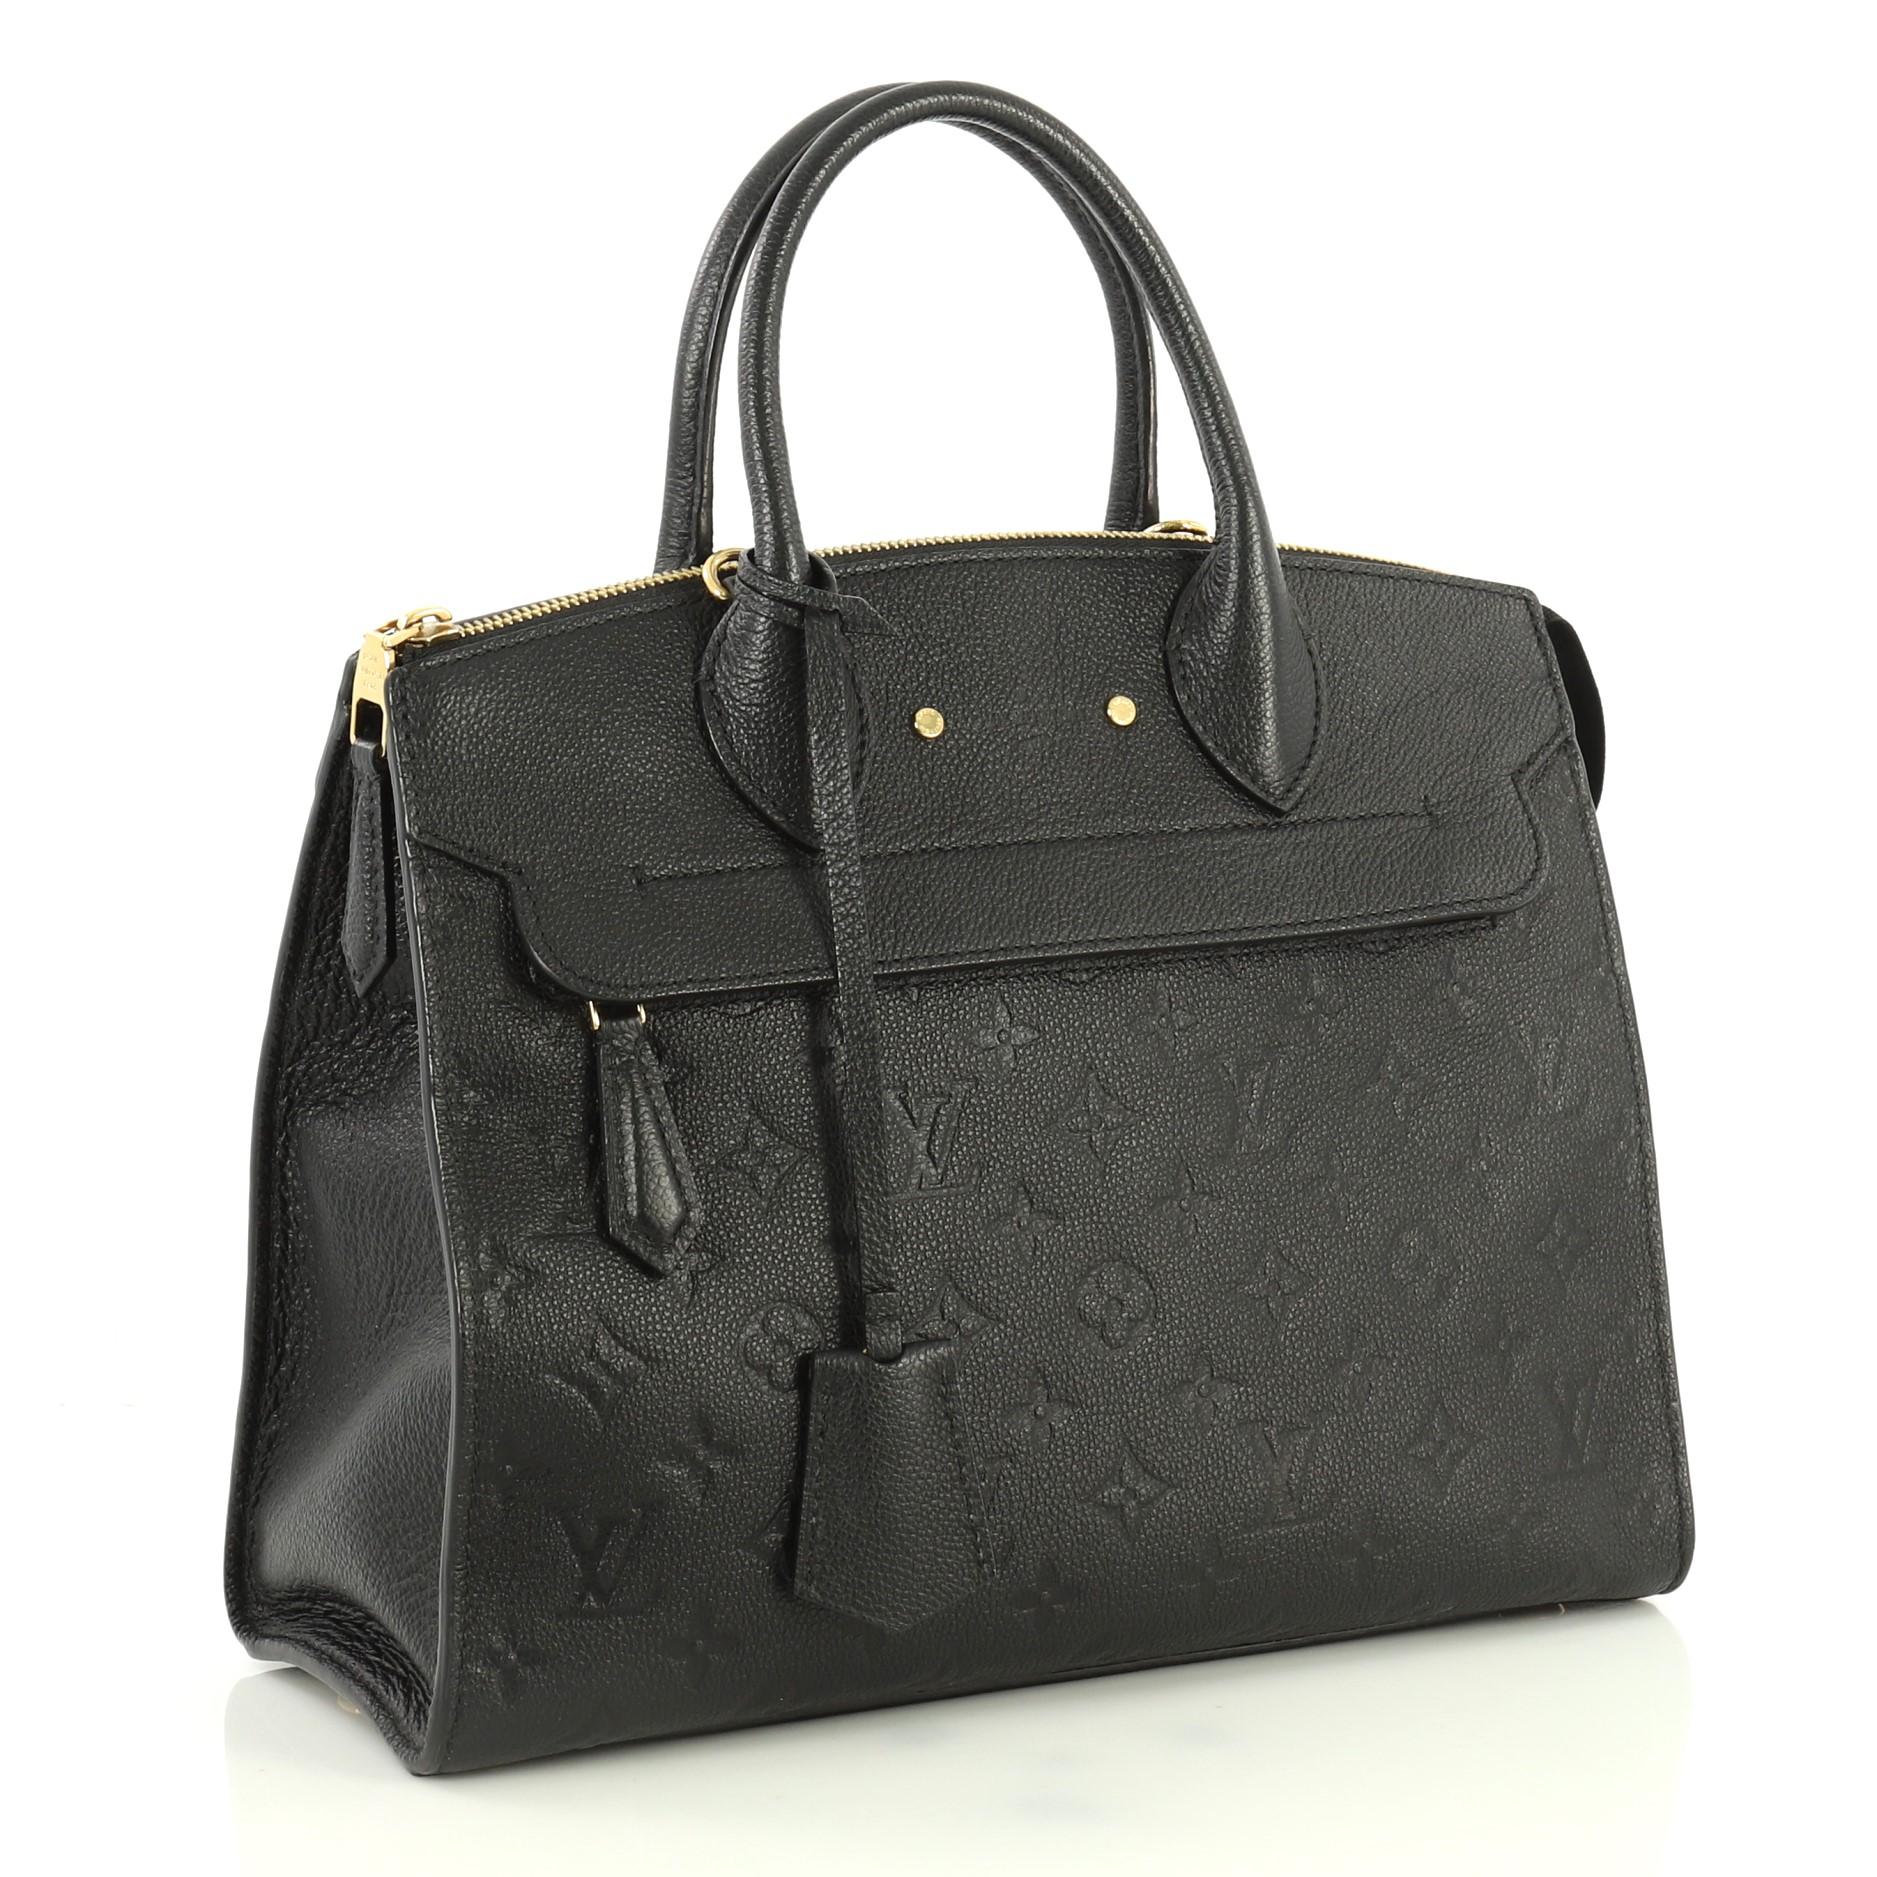 This Louis Vuitton Pont Neuf Handbag Monogram Empreinte Leather MM, crafted in black monogram empreinte leather, features dual rolled leather handles, zip compartments at the front and back, and gold-tone hardware. It opens to a gray fabric